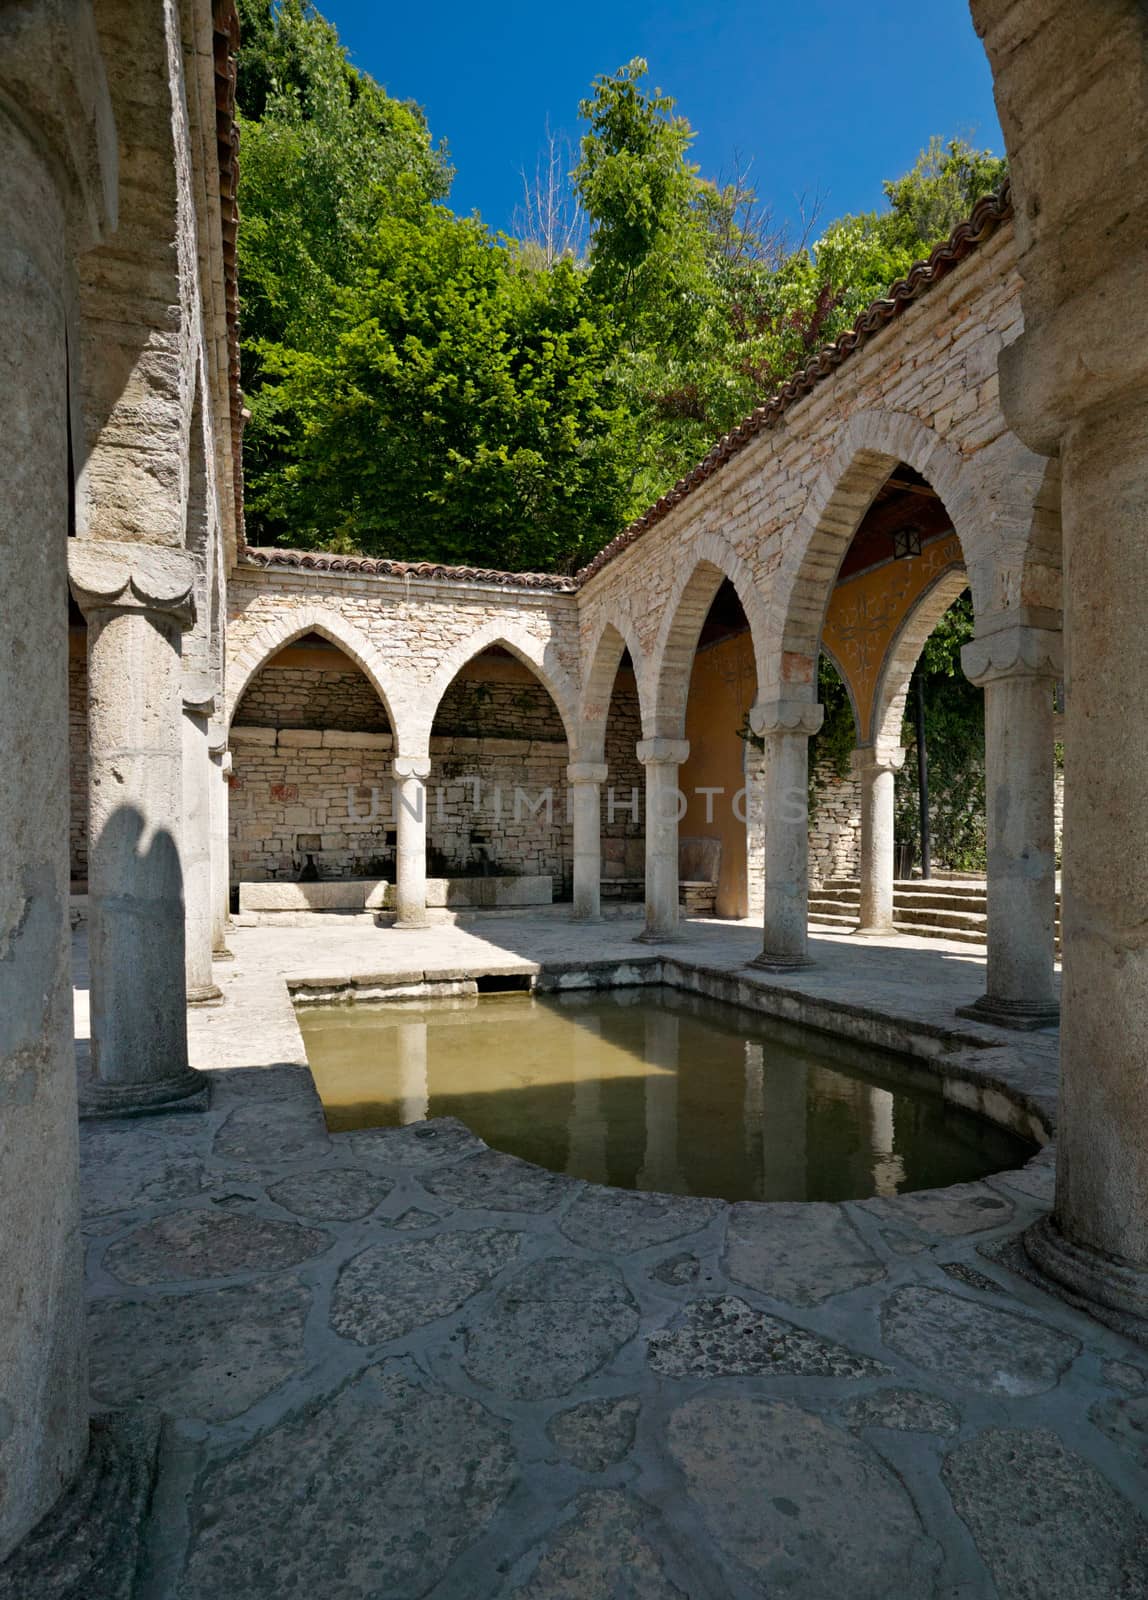 Architecture in Balchik palace by ecobo